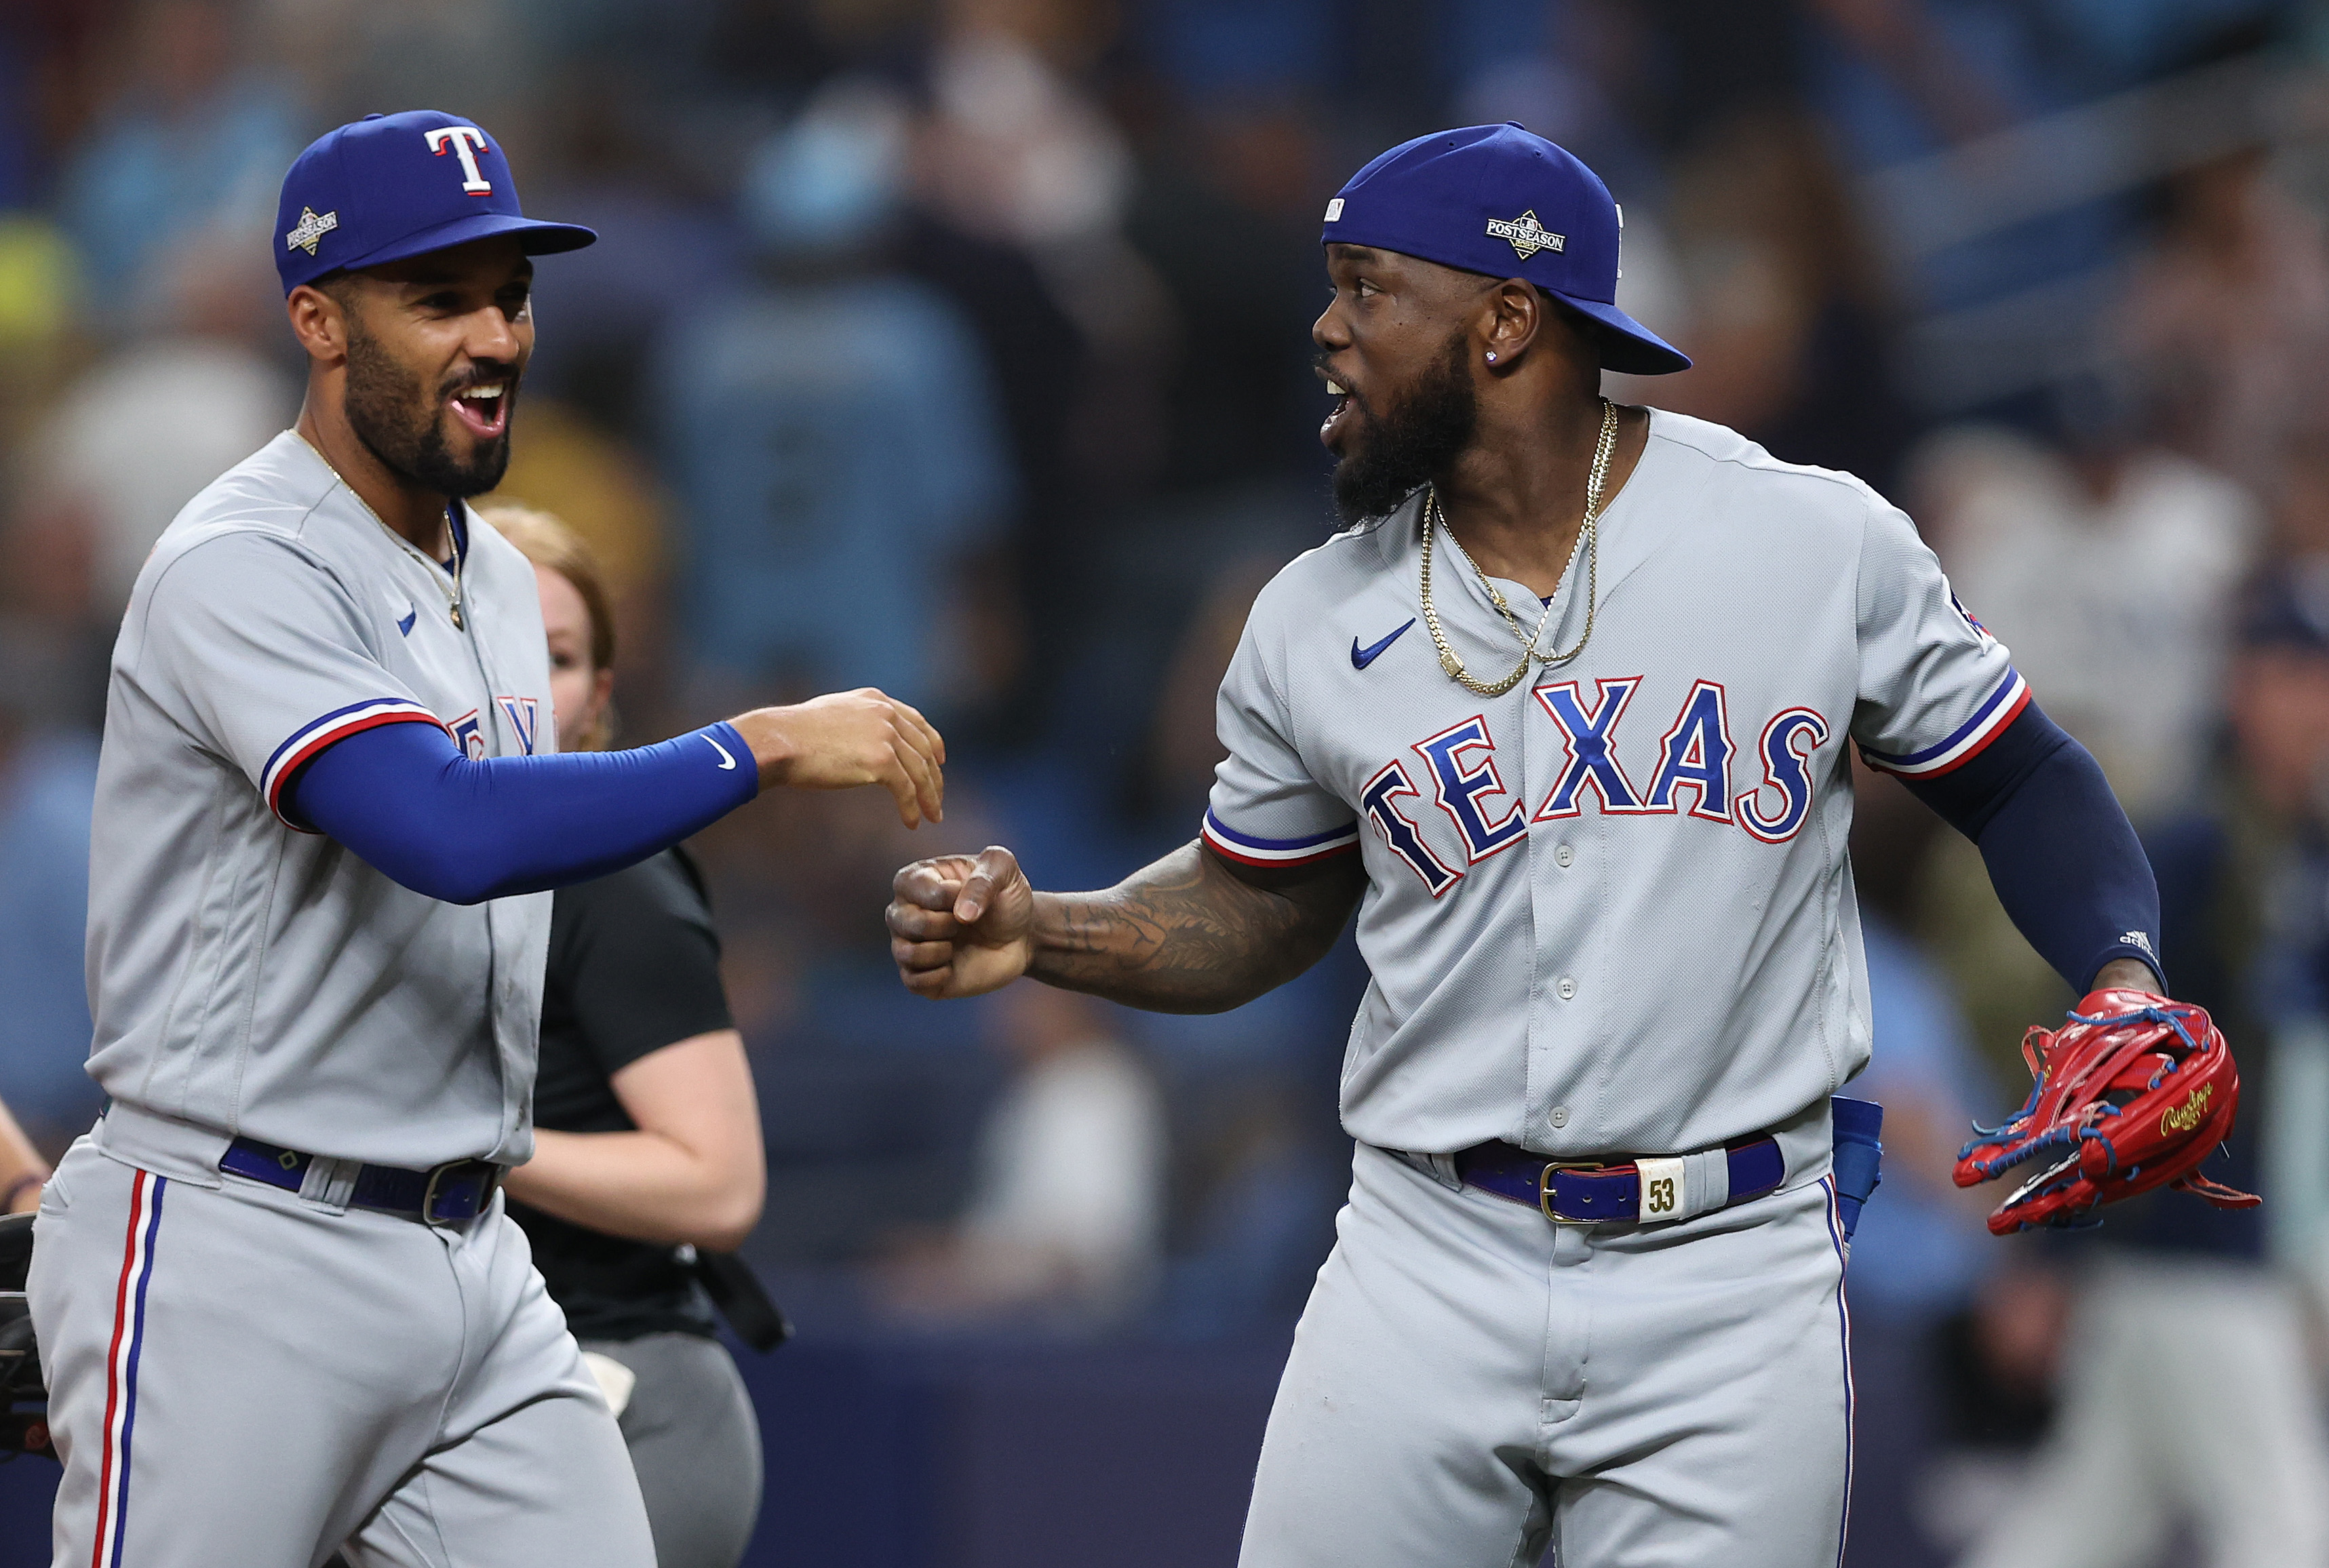 Texas Rangers ALCS Roster Announcement & Thoughts on the Roster